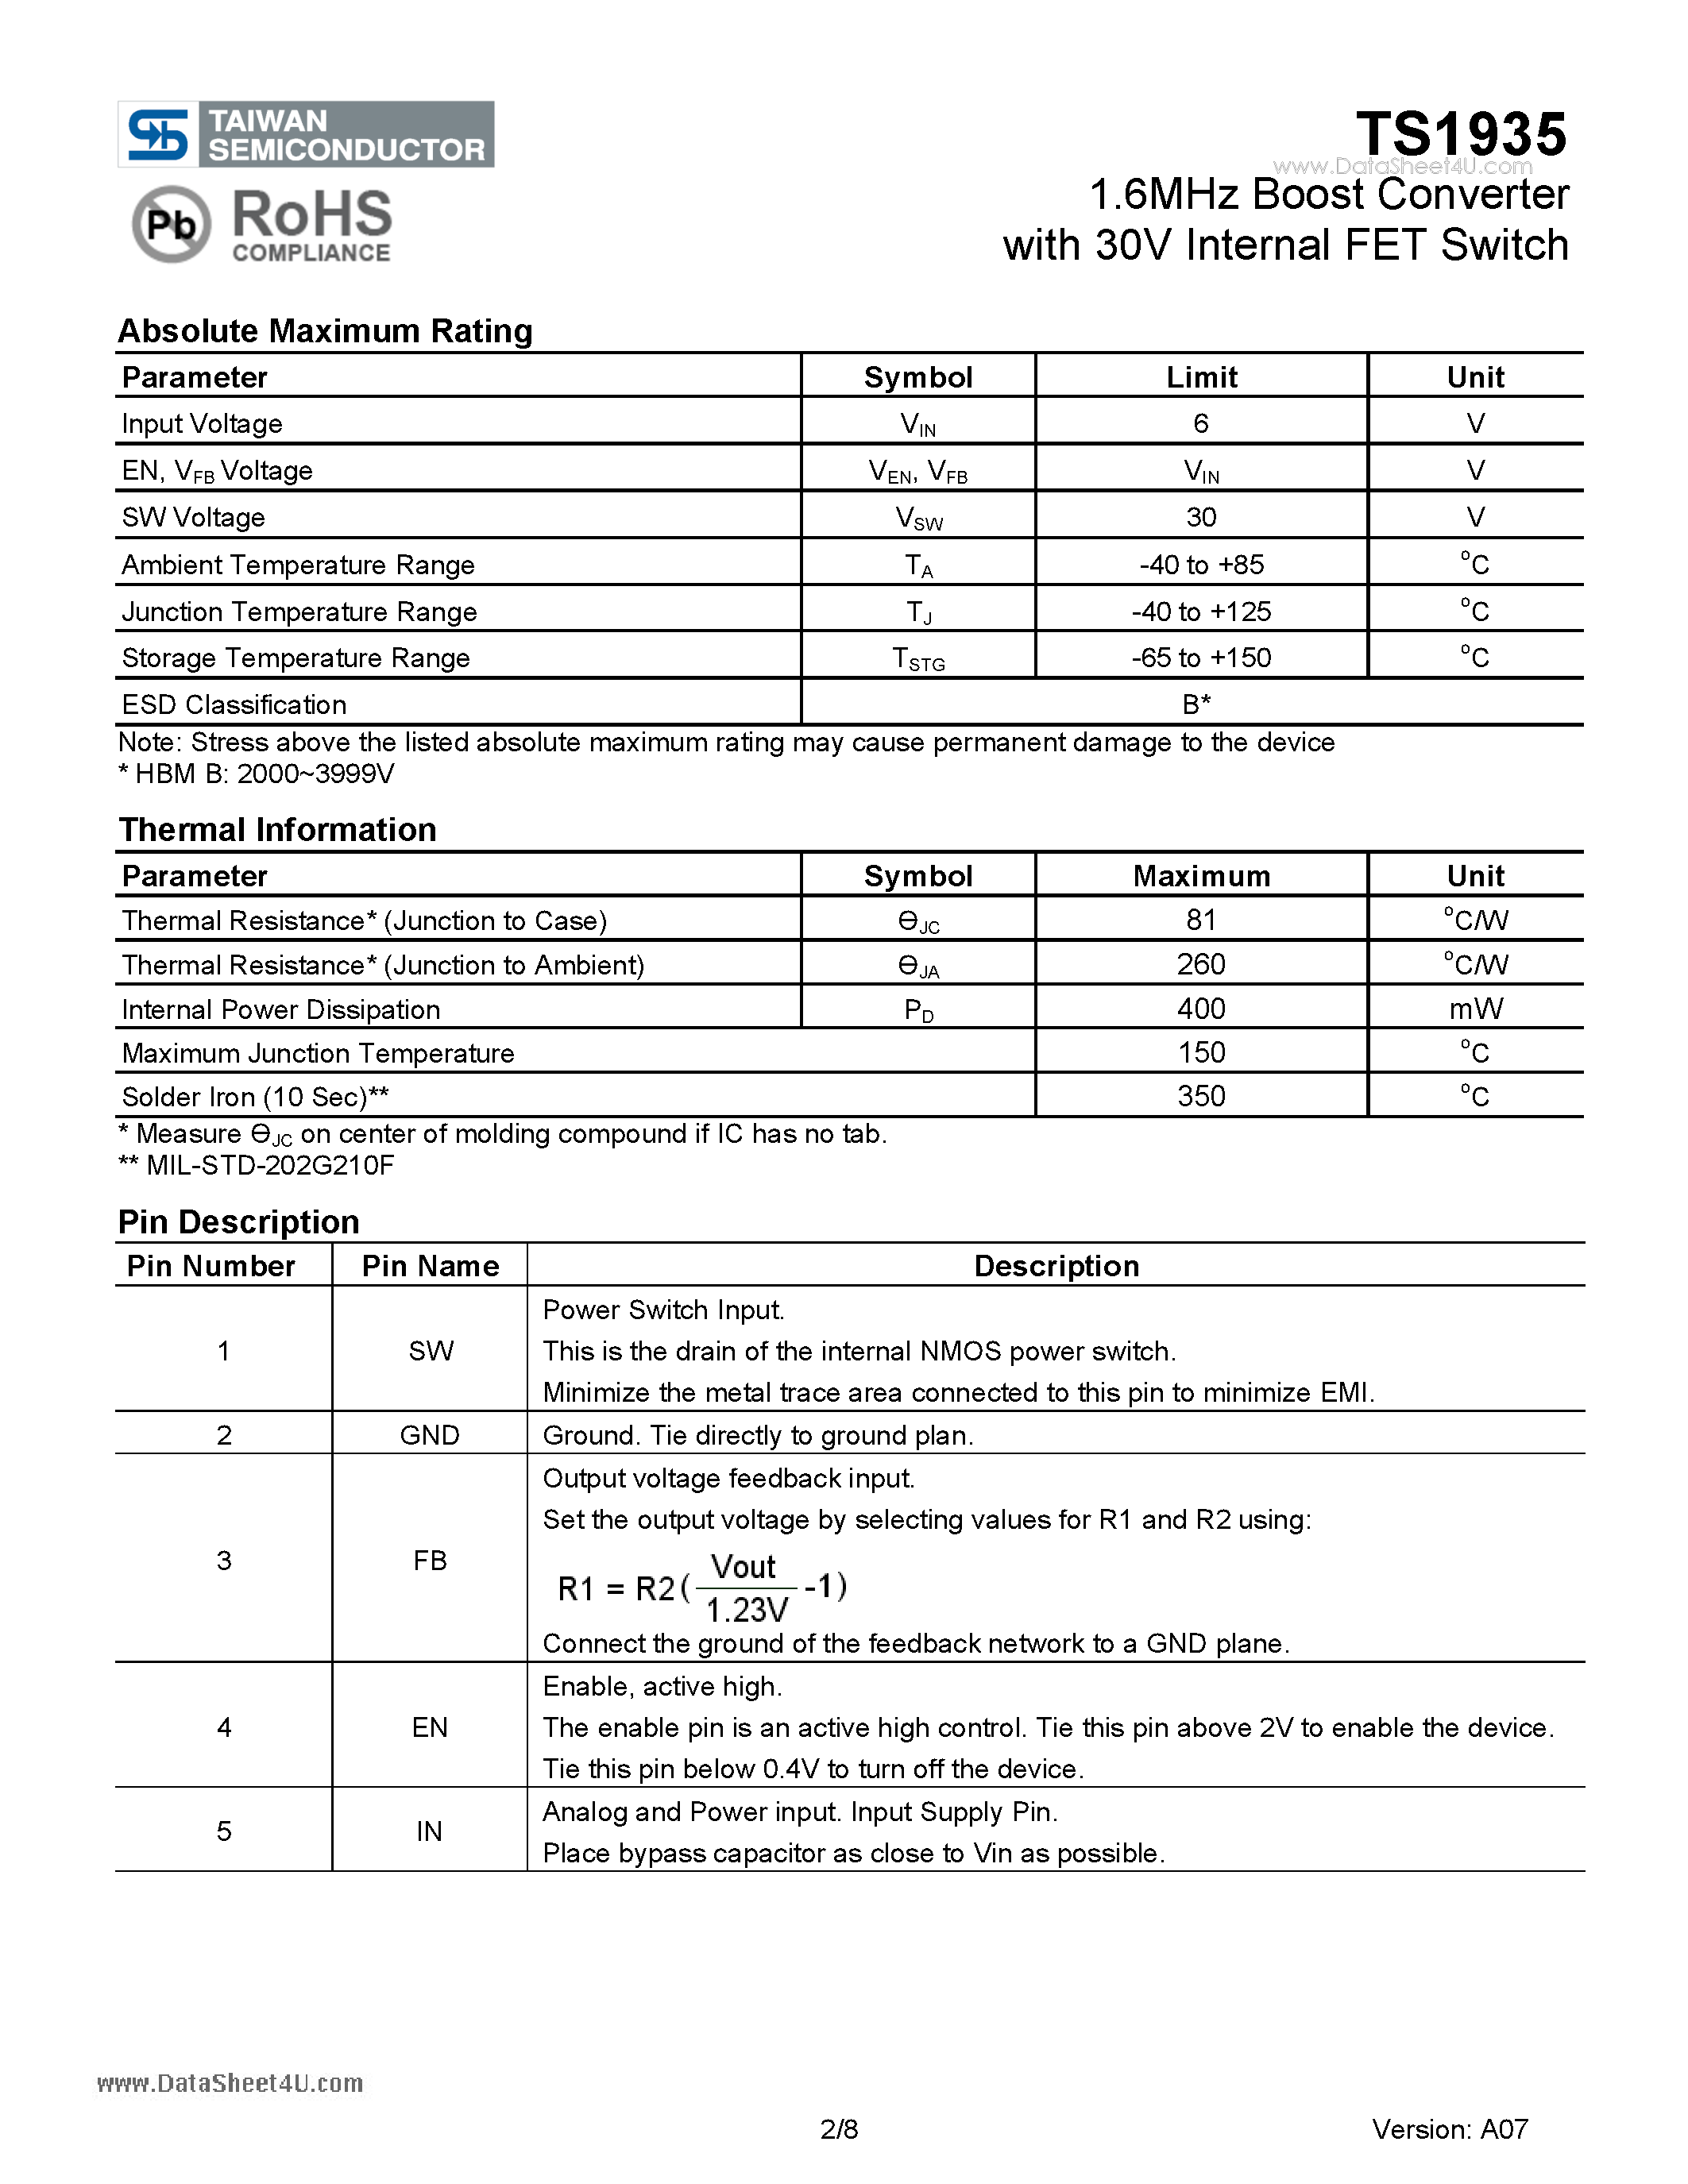 Datasheet TS1935 - 1.6MHz Boost Converter page 2